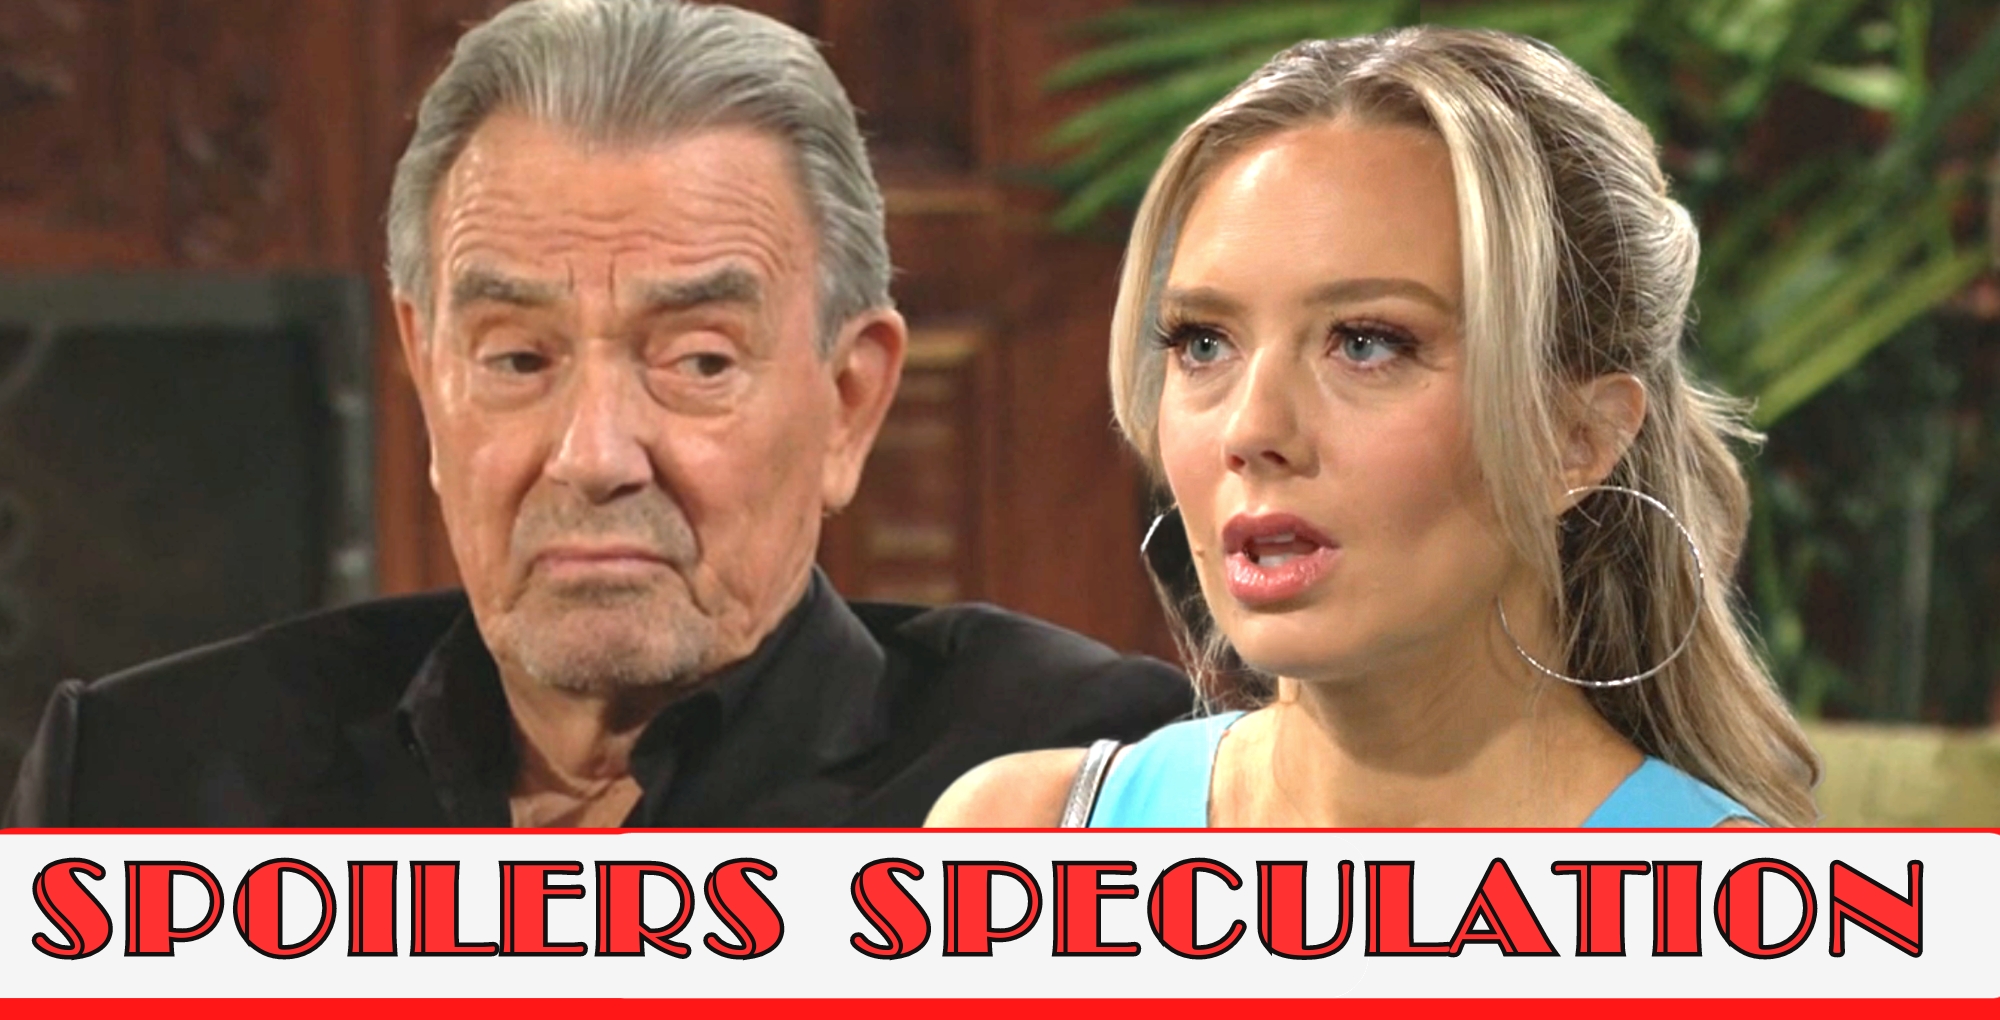 y&r spoilers speculation banner over victor and abby.